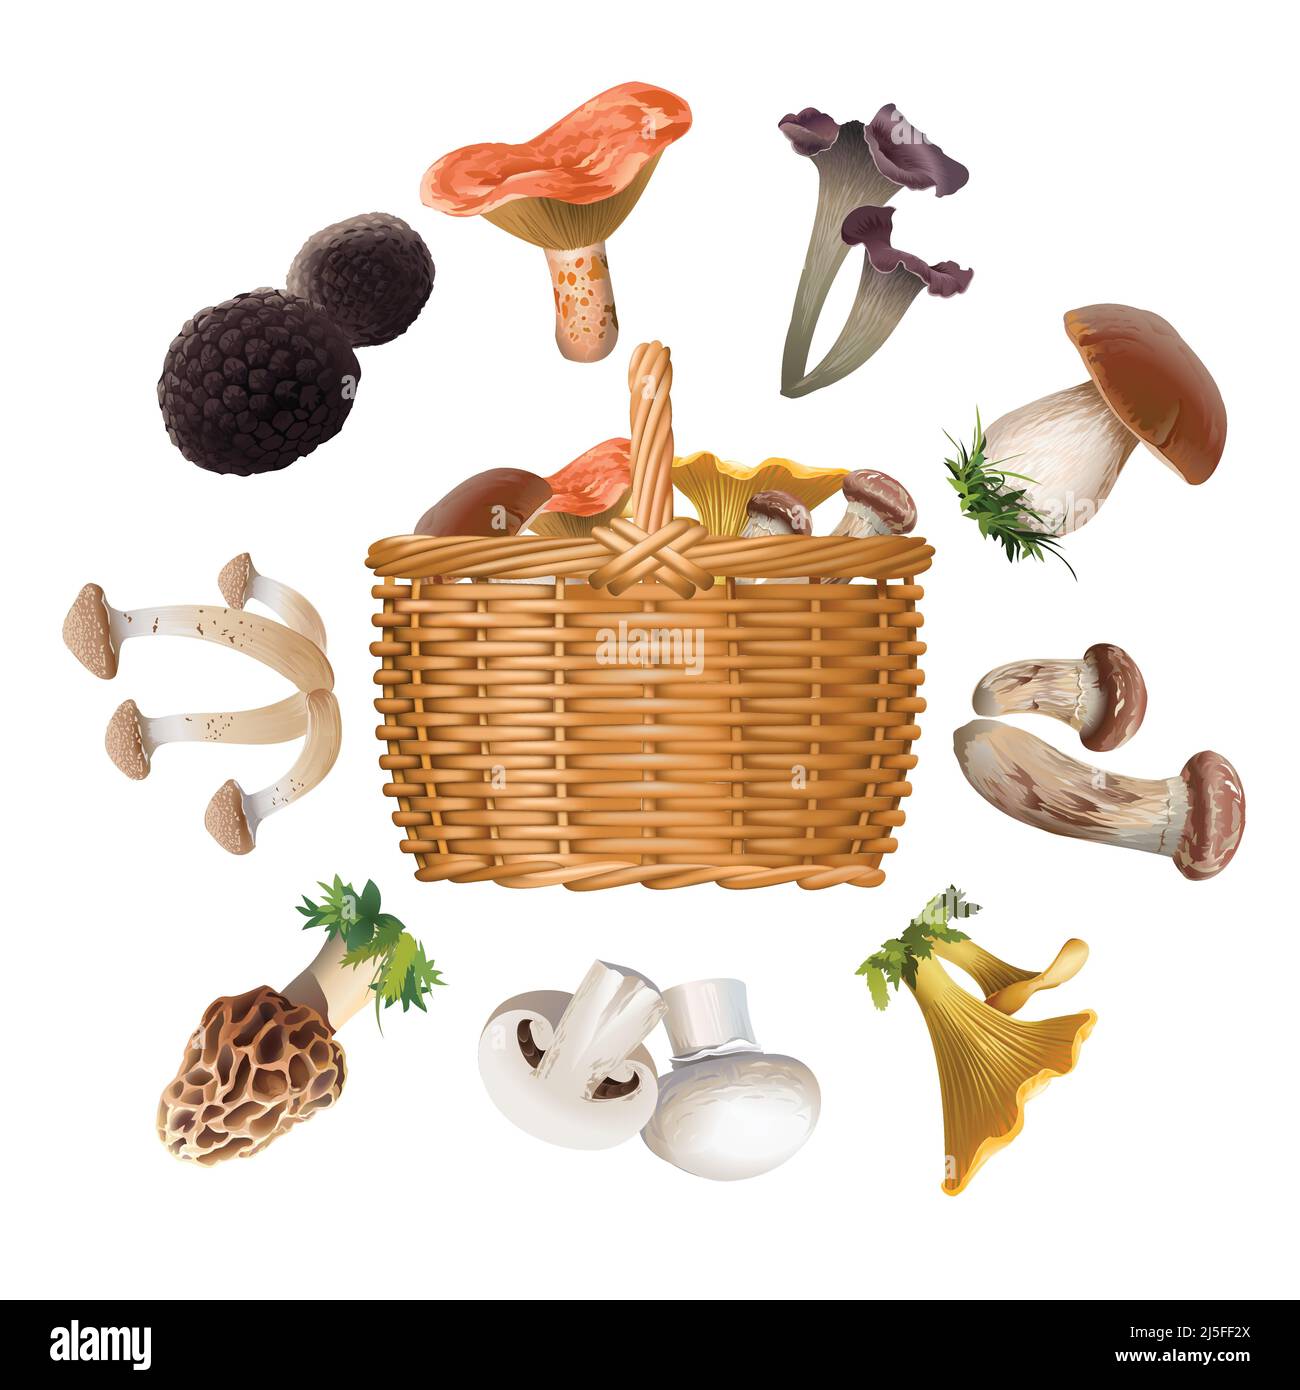 Vector collection of various species of edible mushrooms and basket with mushrooms isolated on white. Realistic style Stock Vector